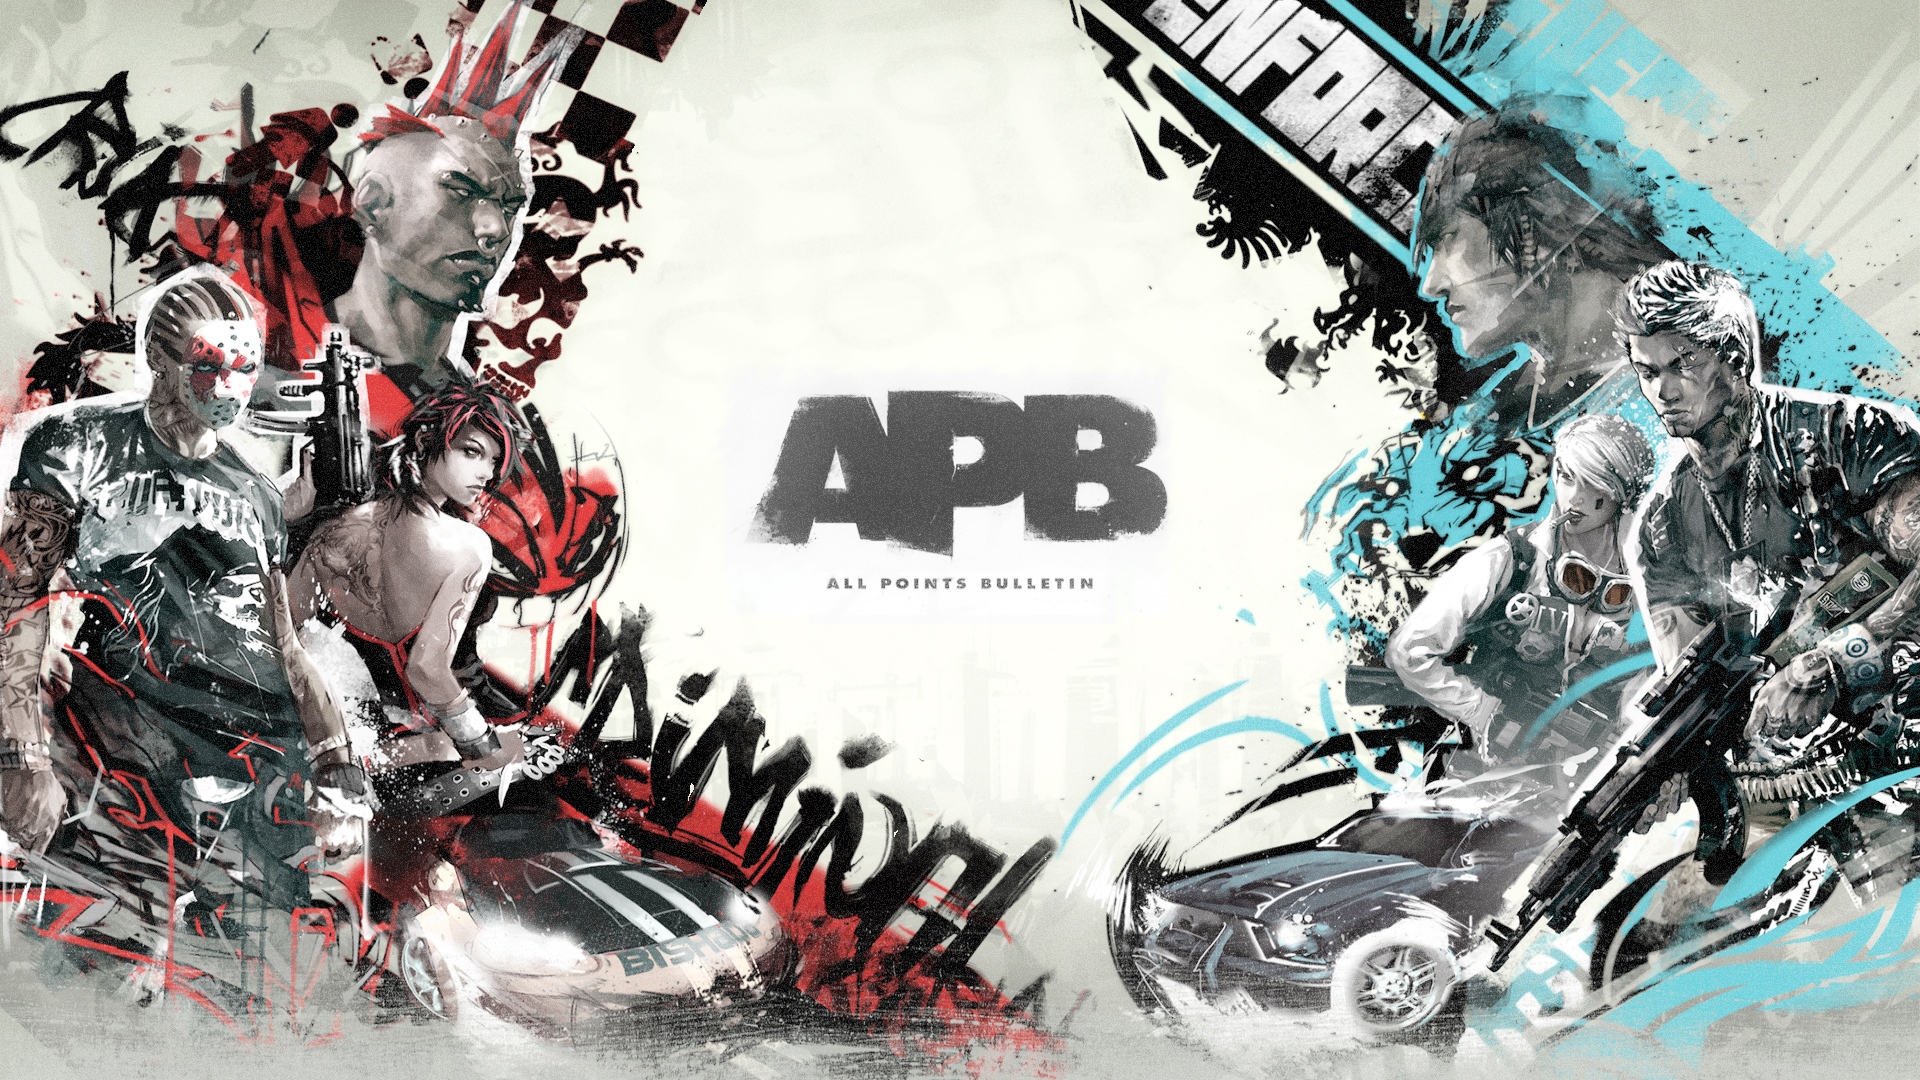 How to download apb reloaded